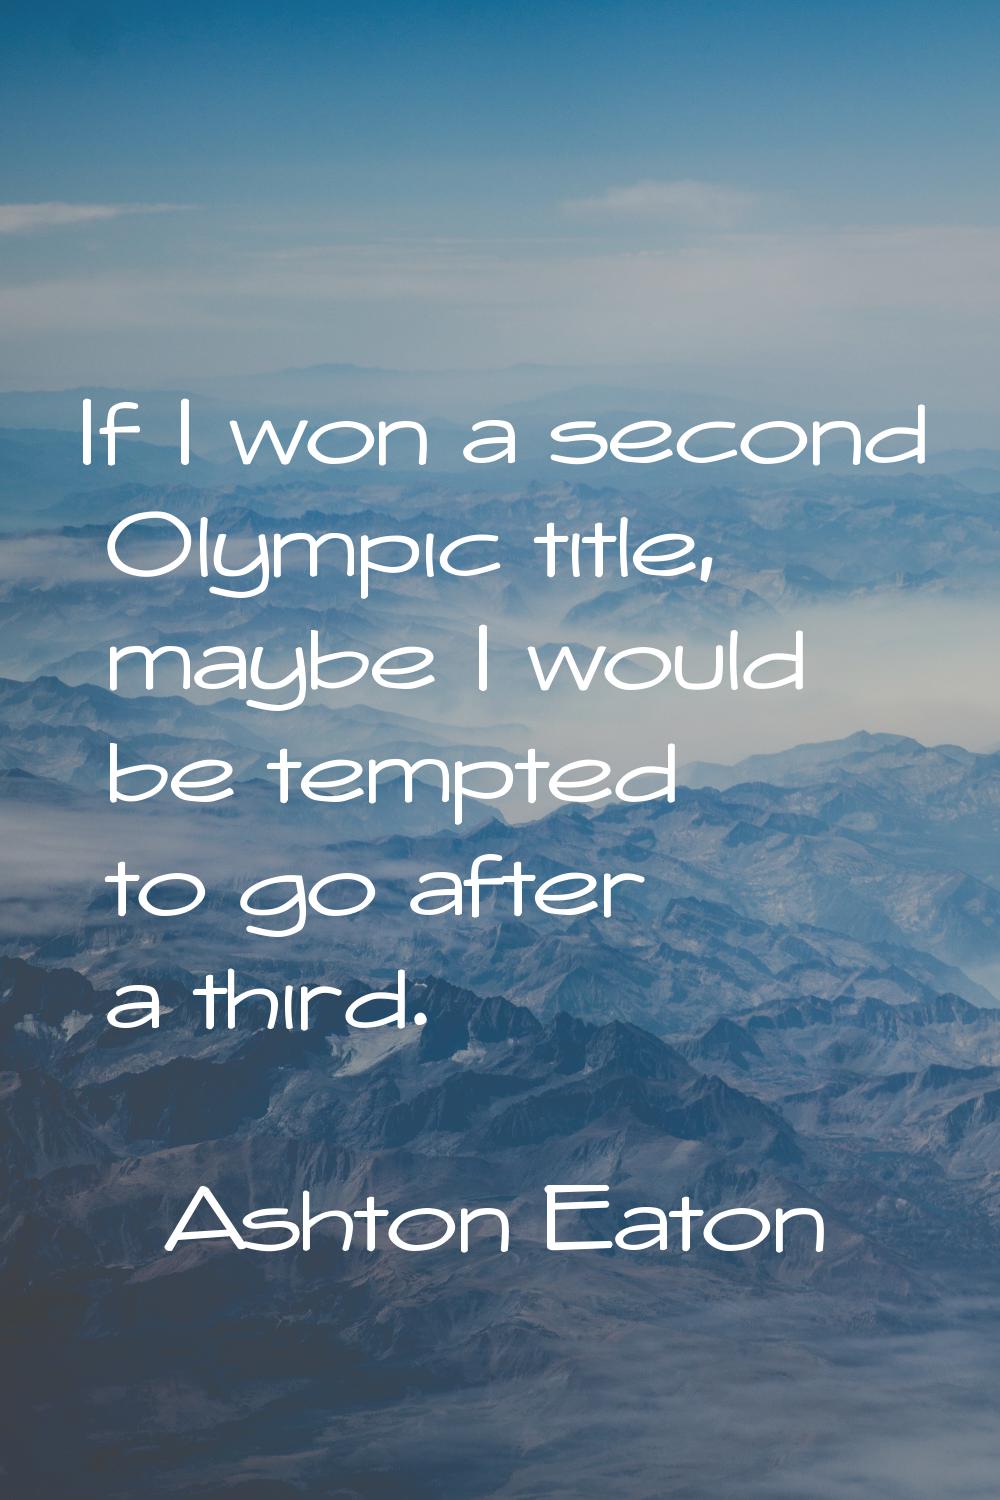 If I won a second Olympic title, maybe I would be tempted to go after a third.